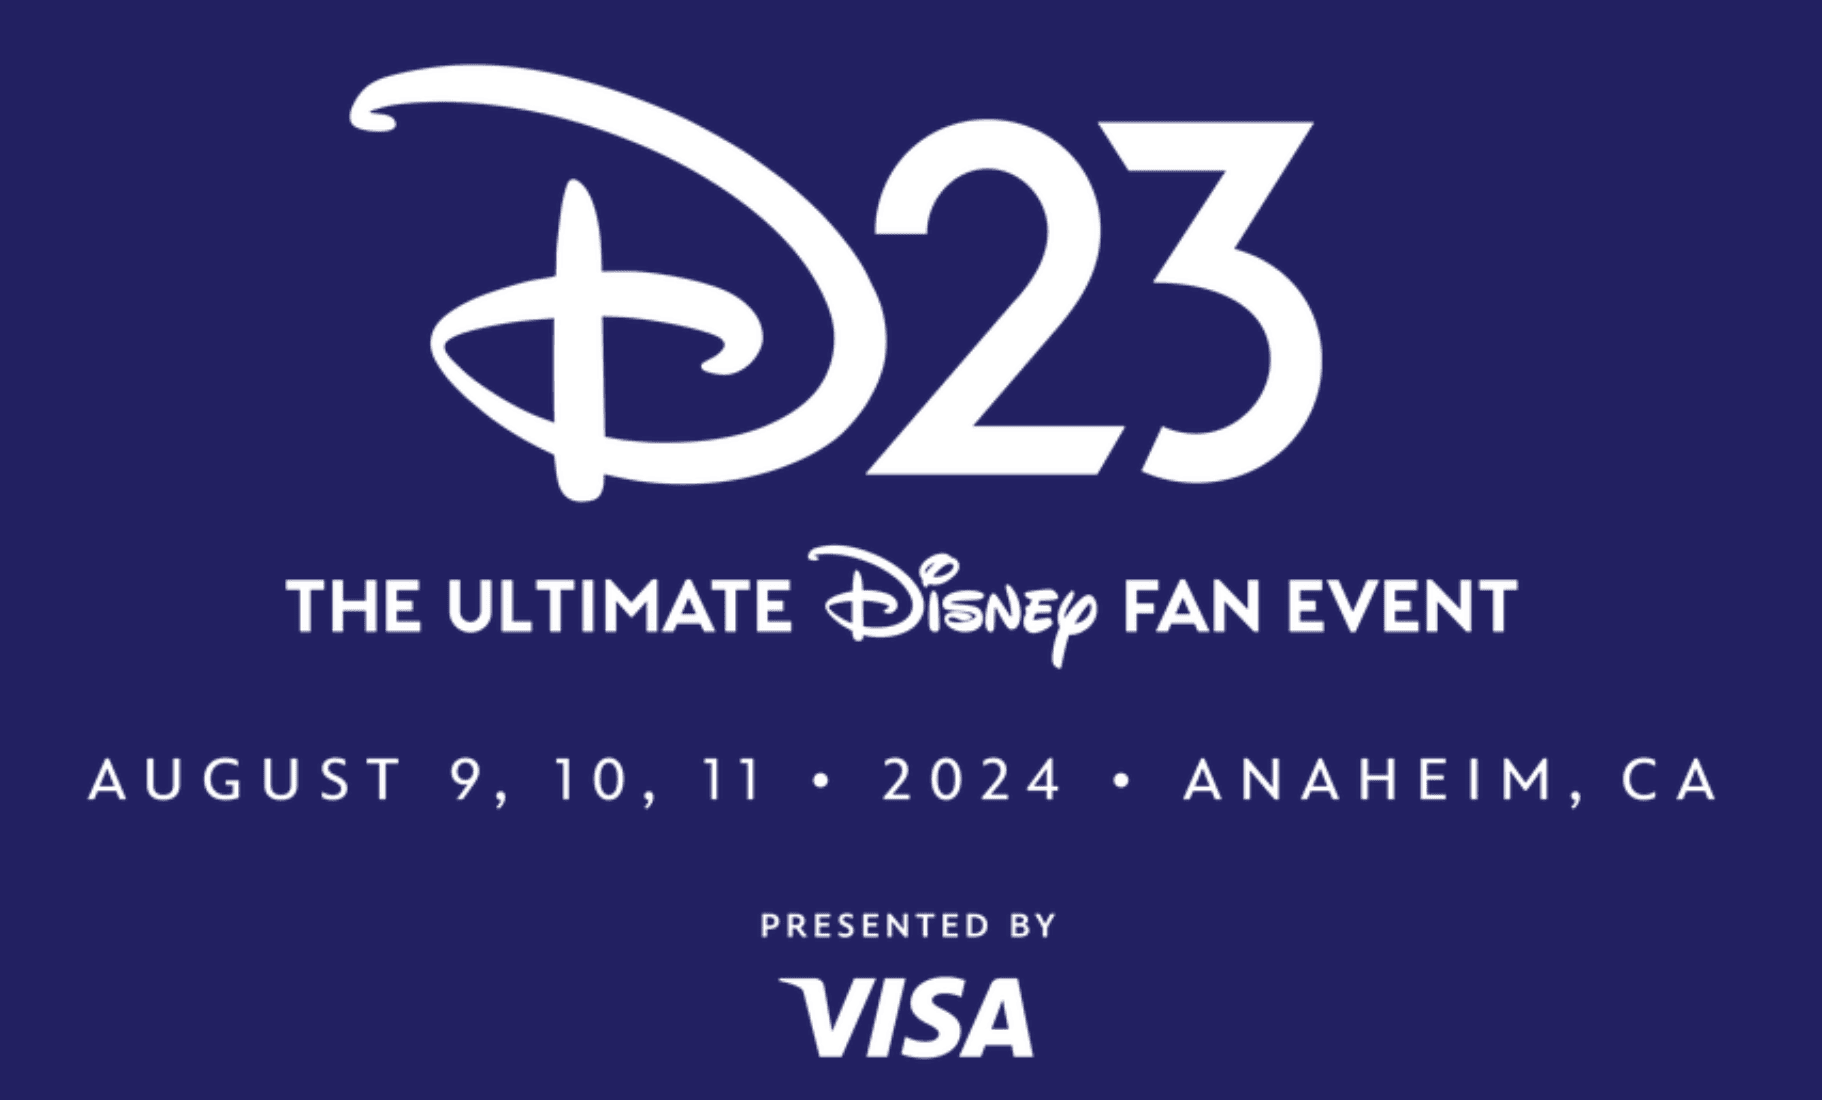 Disney Fans: D23 Shopping Experiences for the 2024 D23 Expo!